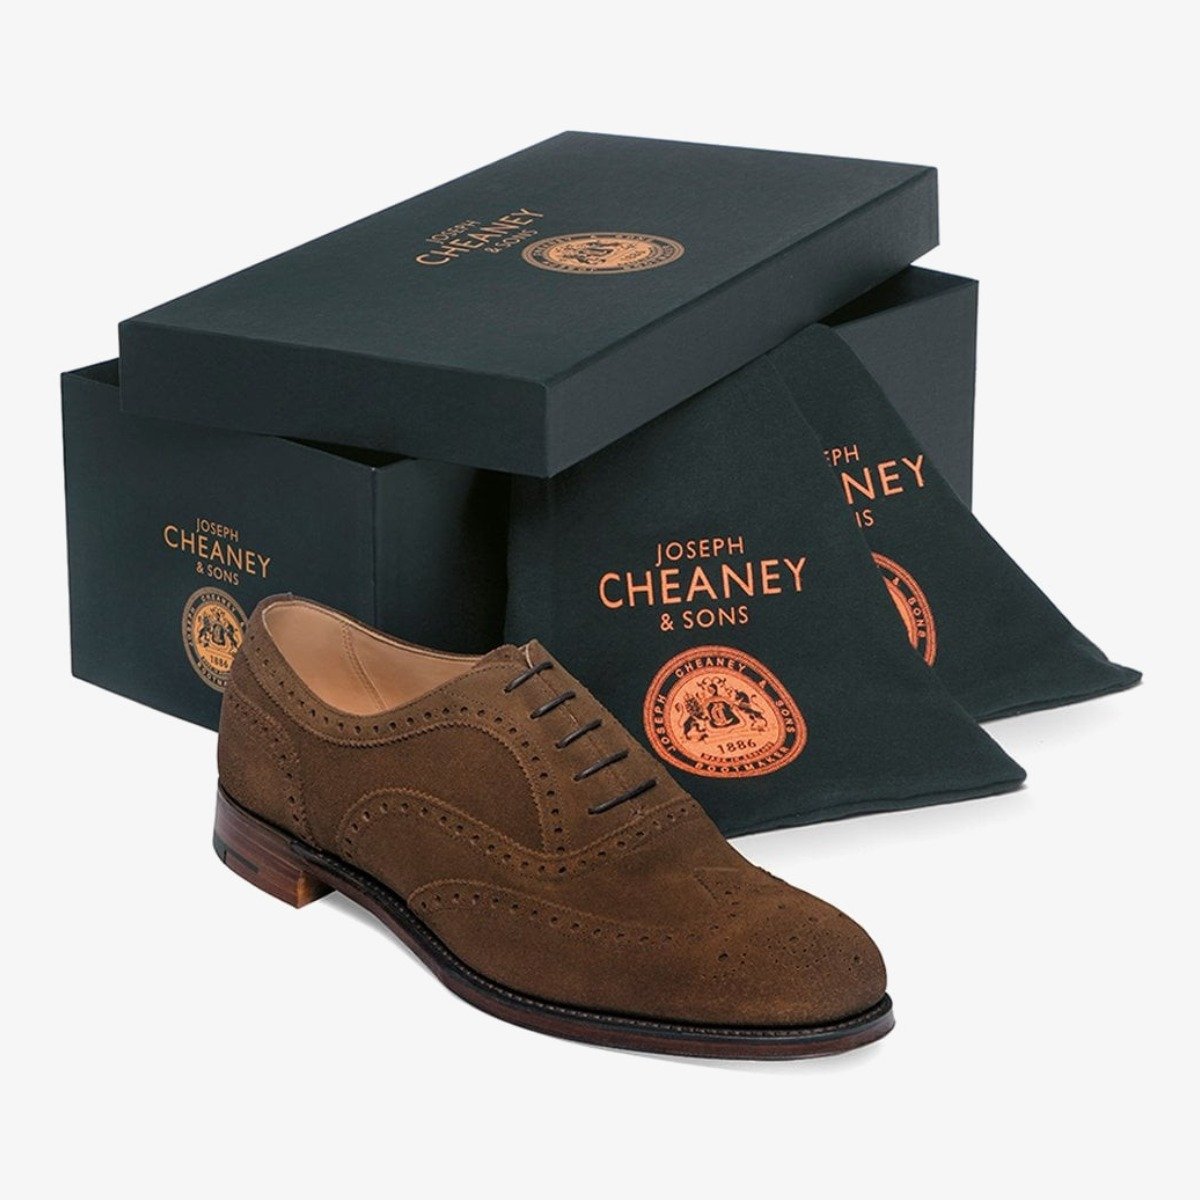 Cheaney Arthur III plough suede oxford shoes